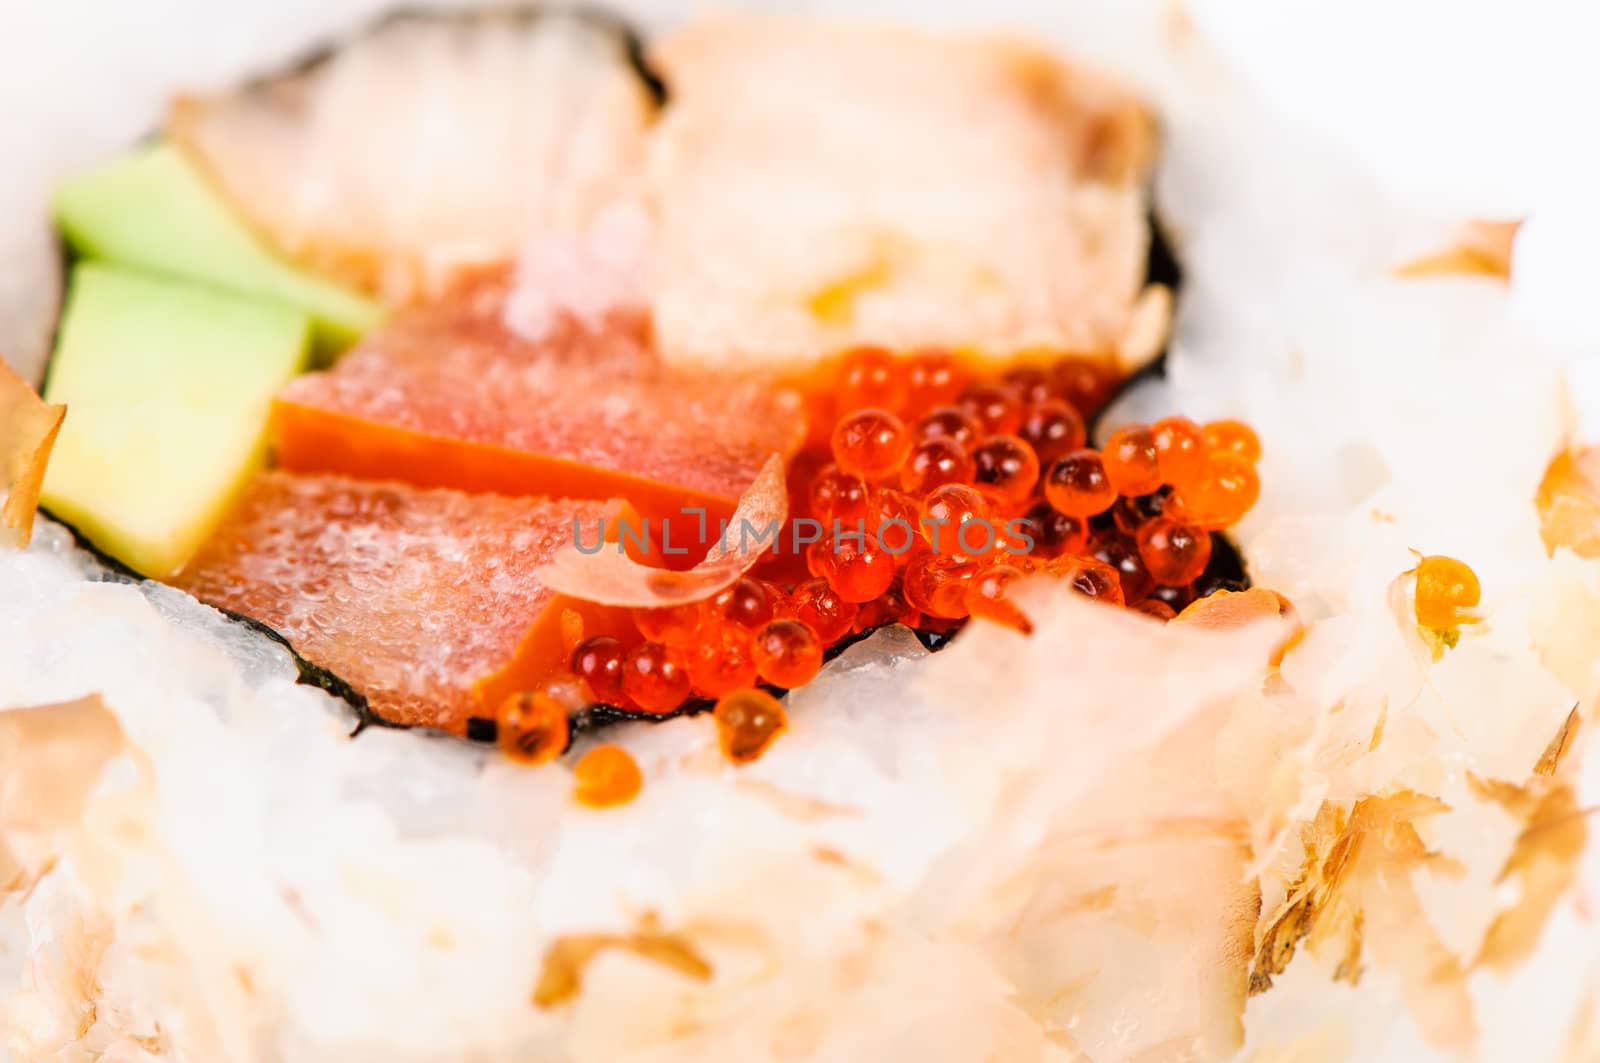 Macro sushi set with avocado, fish and red caviar on white background